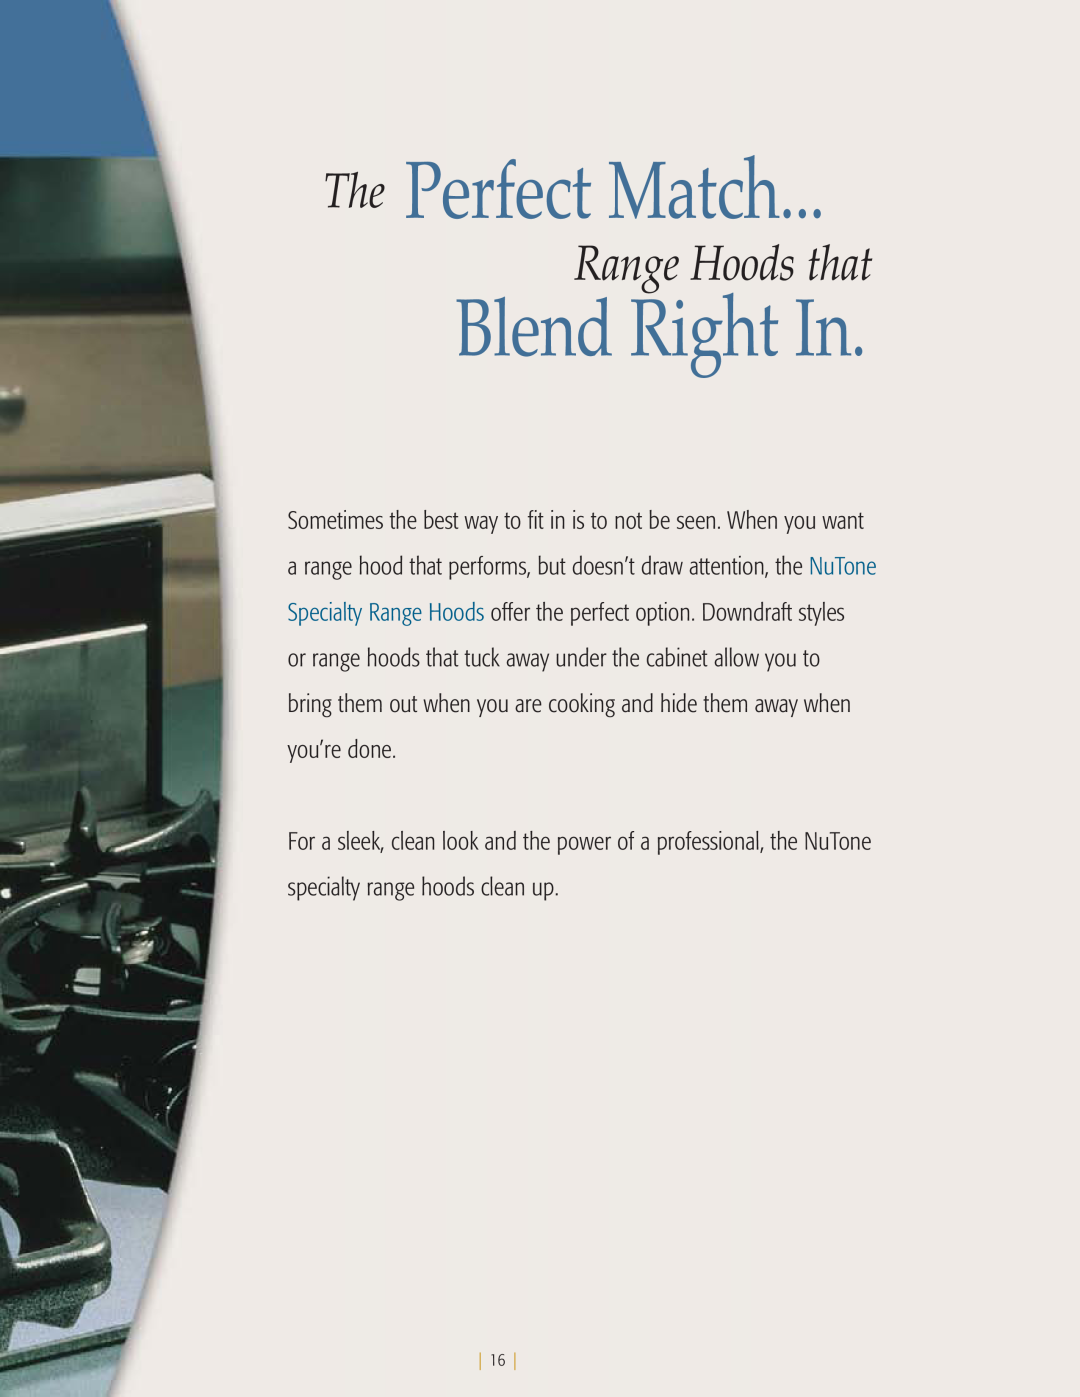 NuTone kitchen ventilation manual The Perfect Match, Blend Right In, Range Hoods that 